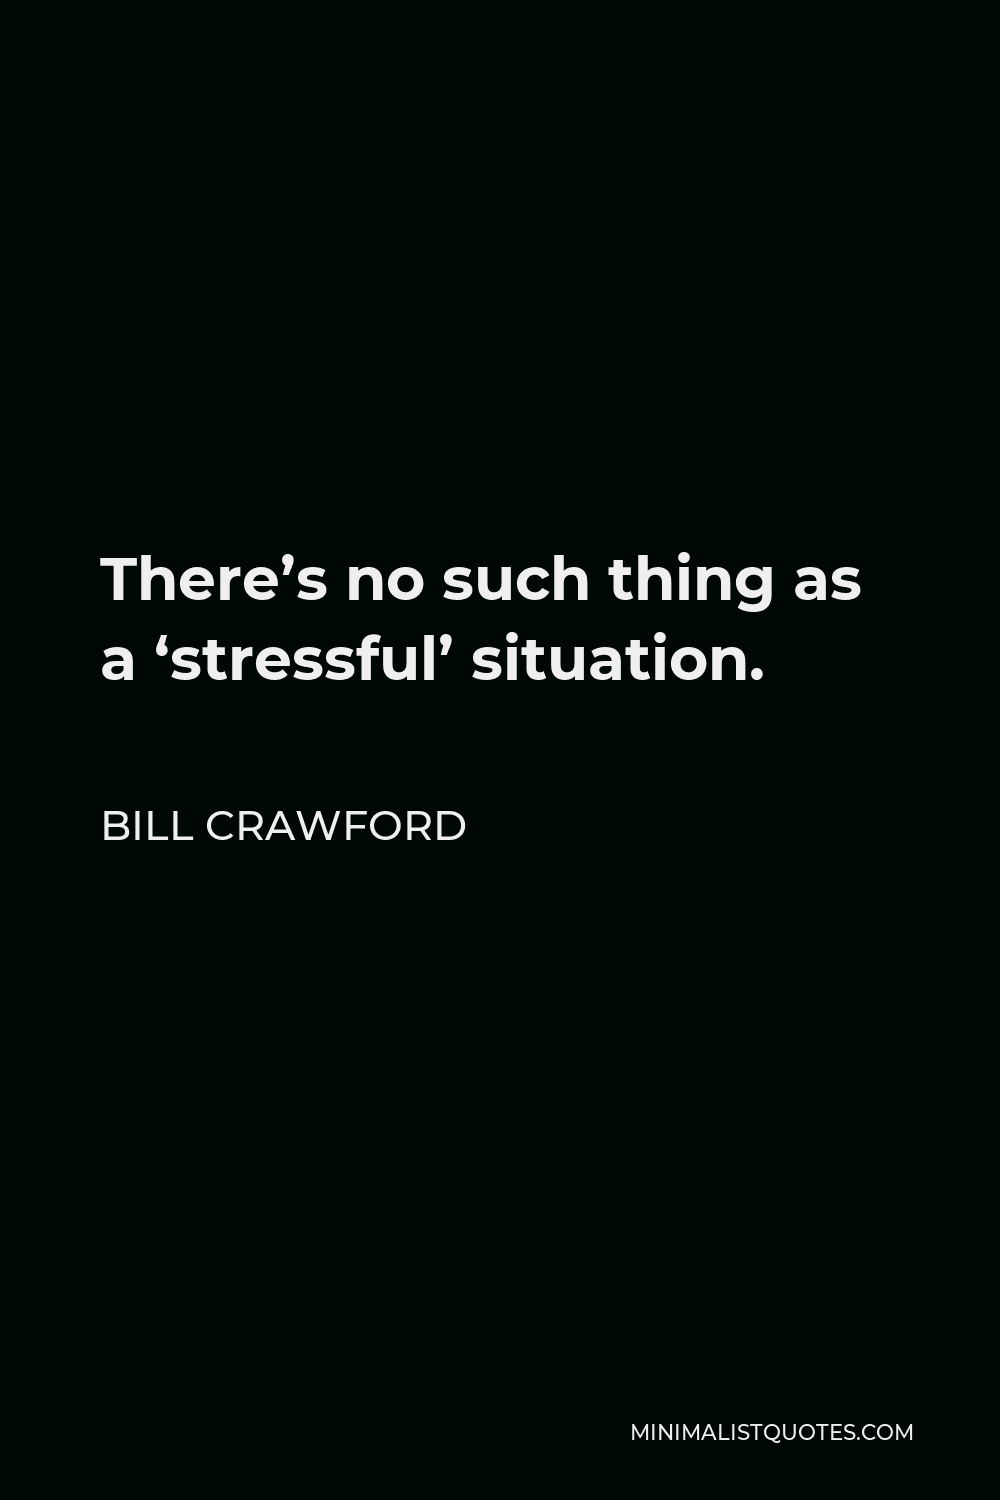 Bill Crawford Quote - There’s no such thing as a ‘stressful’ situation.